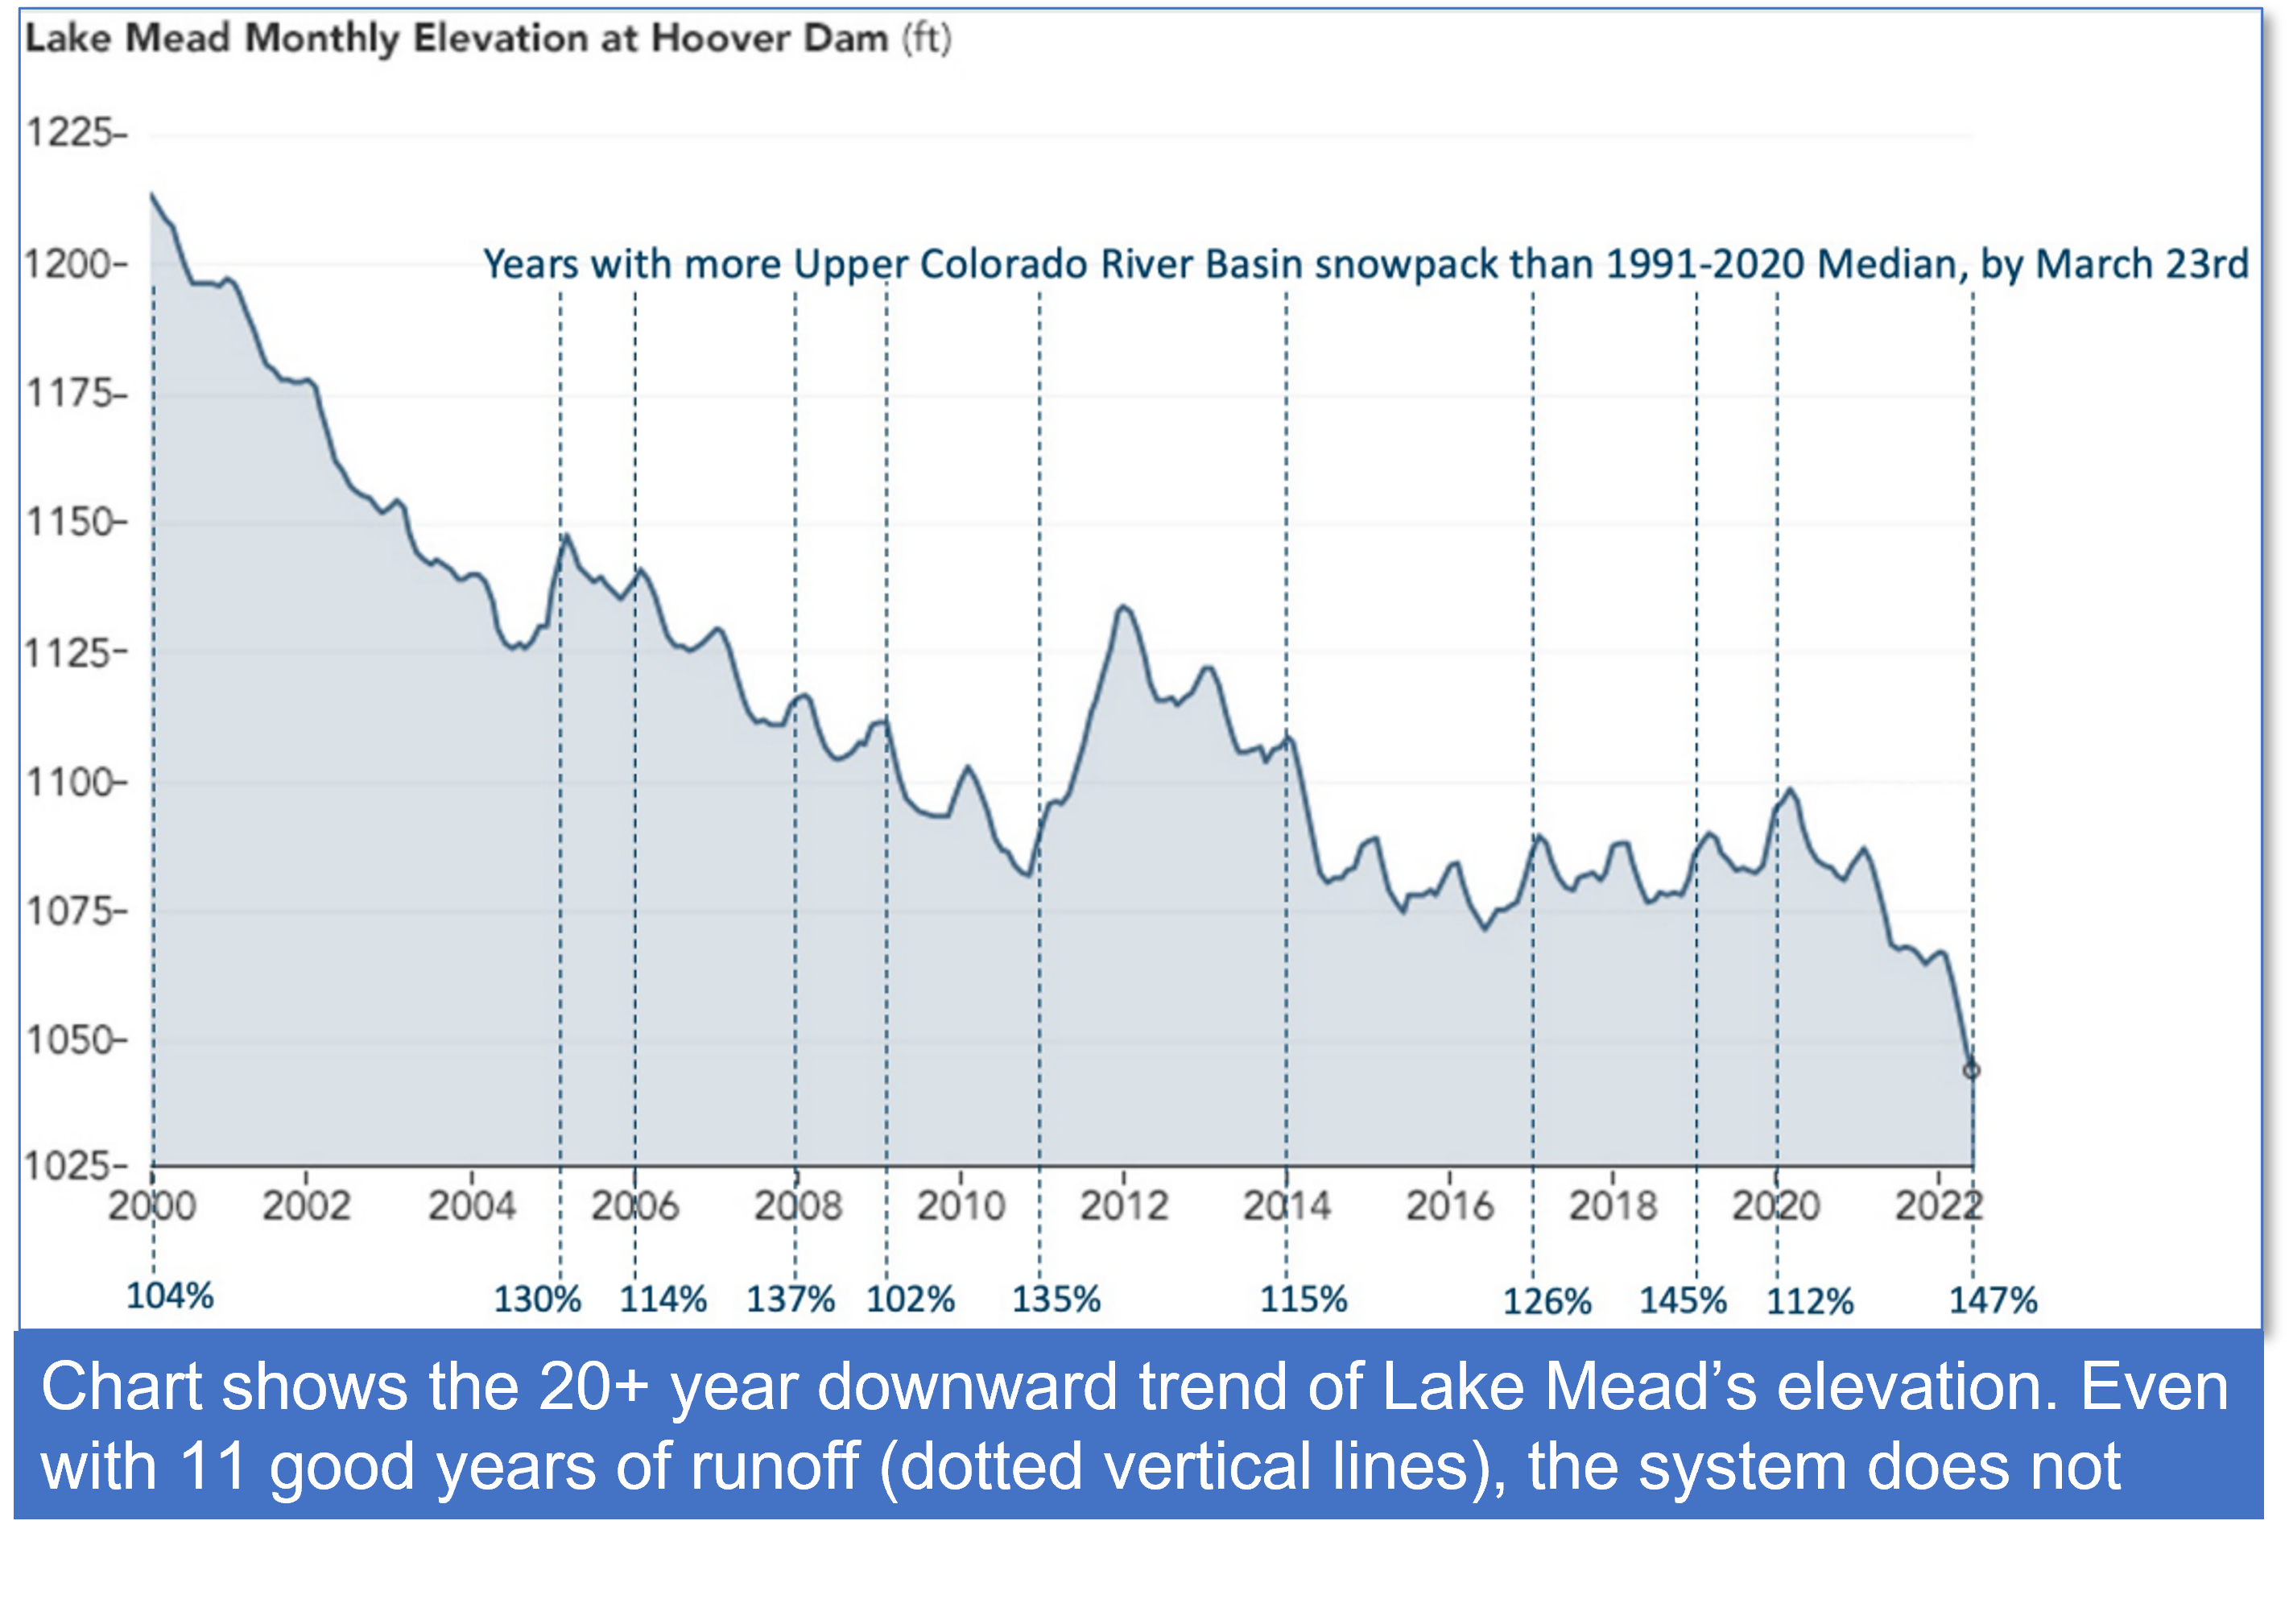 Lake Mead 20 year trend